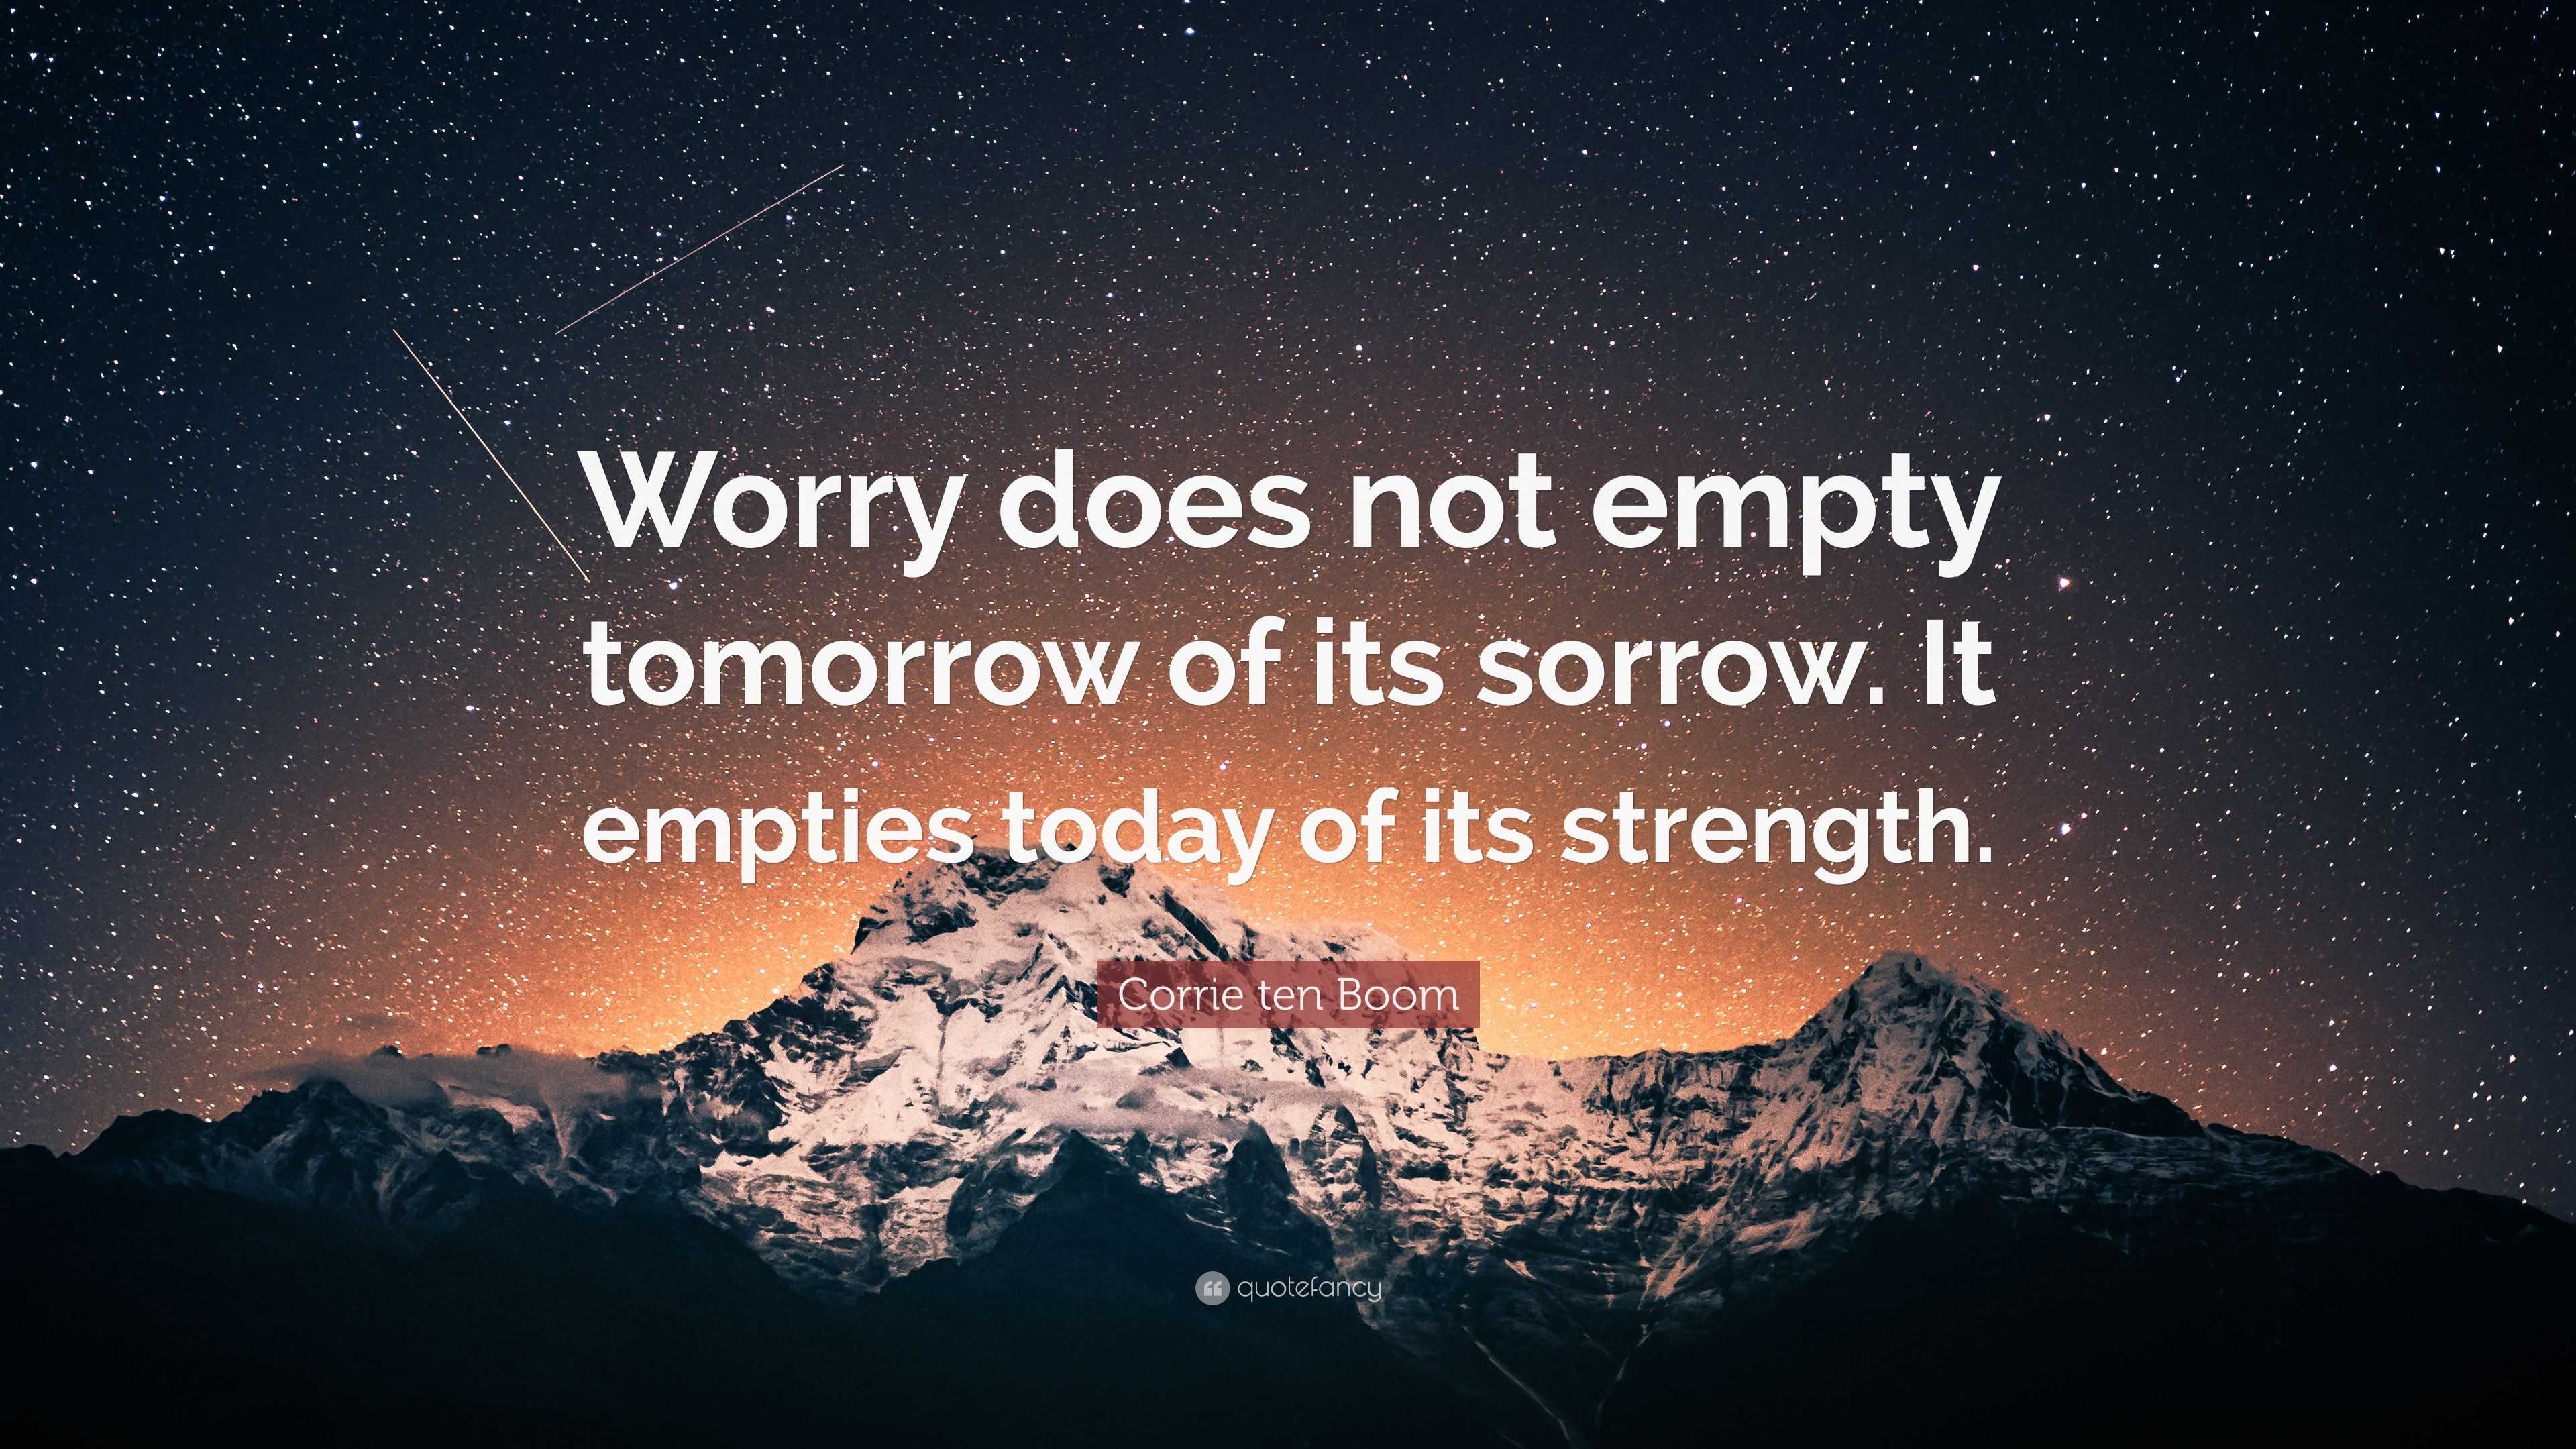 Corrie ten Boom Quote: “Worry does not empty tomorrow of its sorrow. It